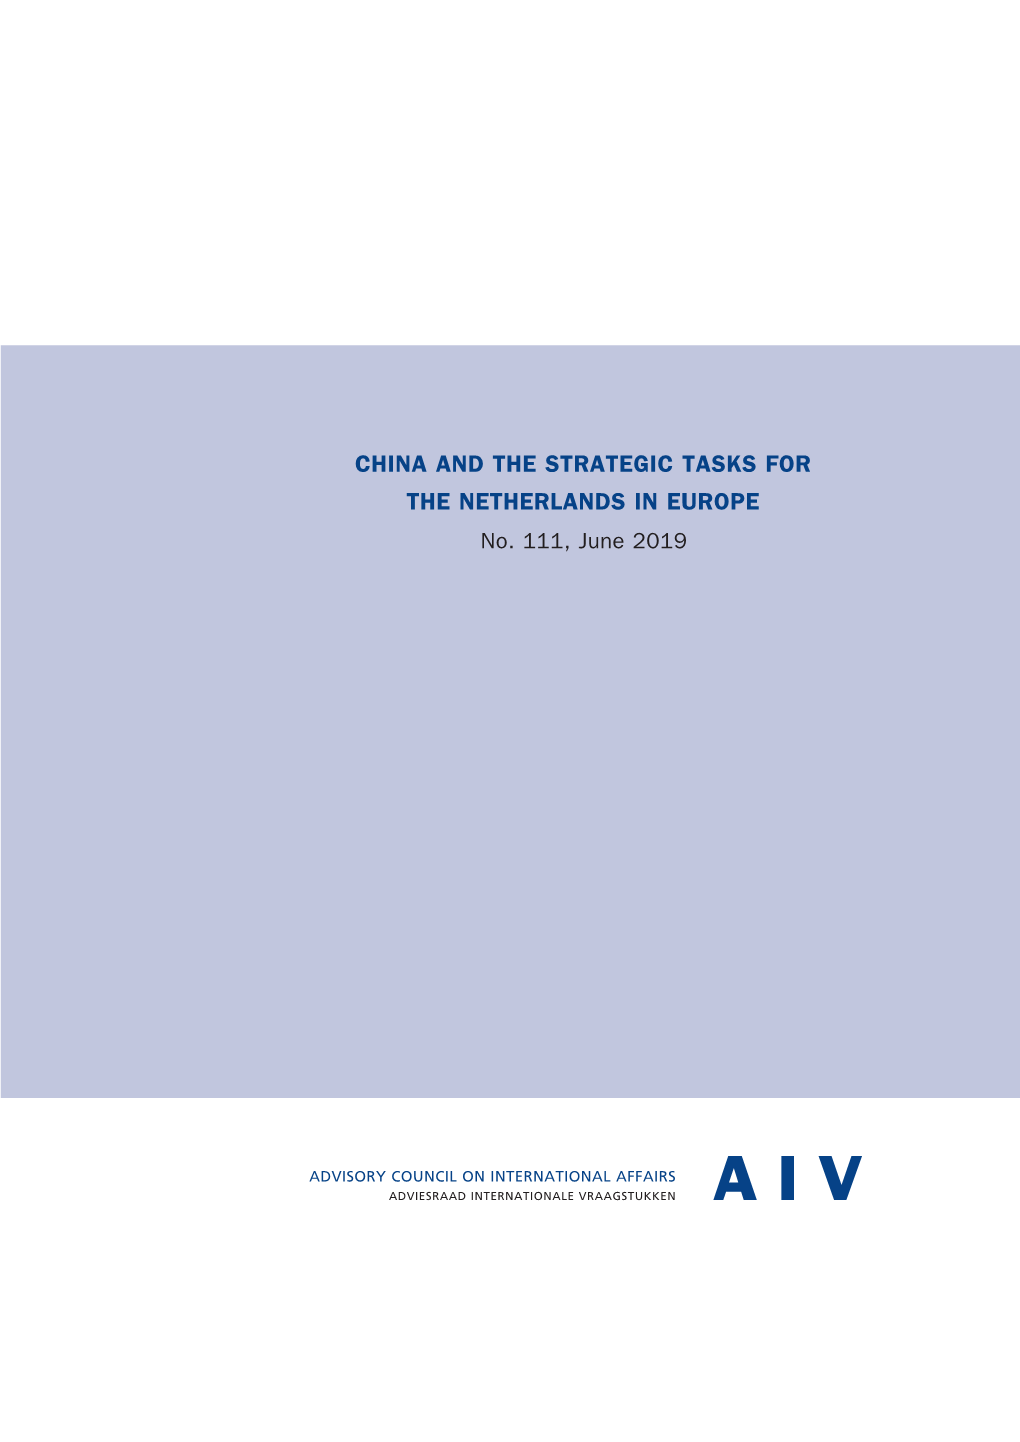 "Advisory Report 111: China and the Strategic Tasks for the Netherlands